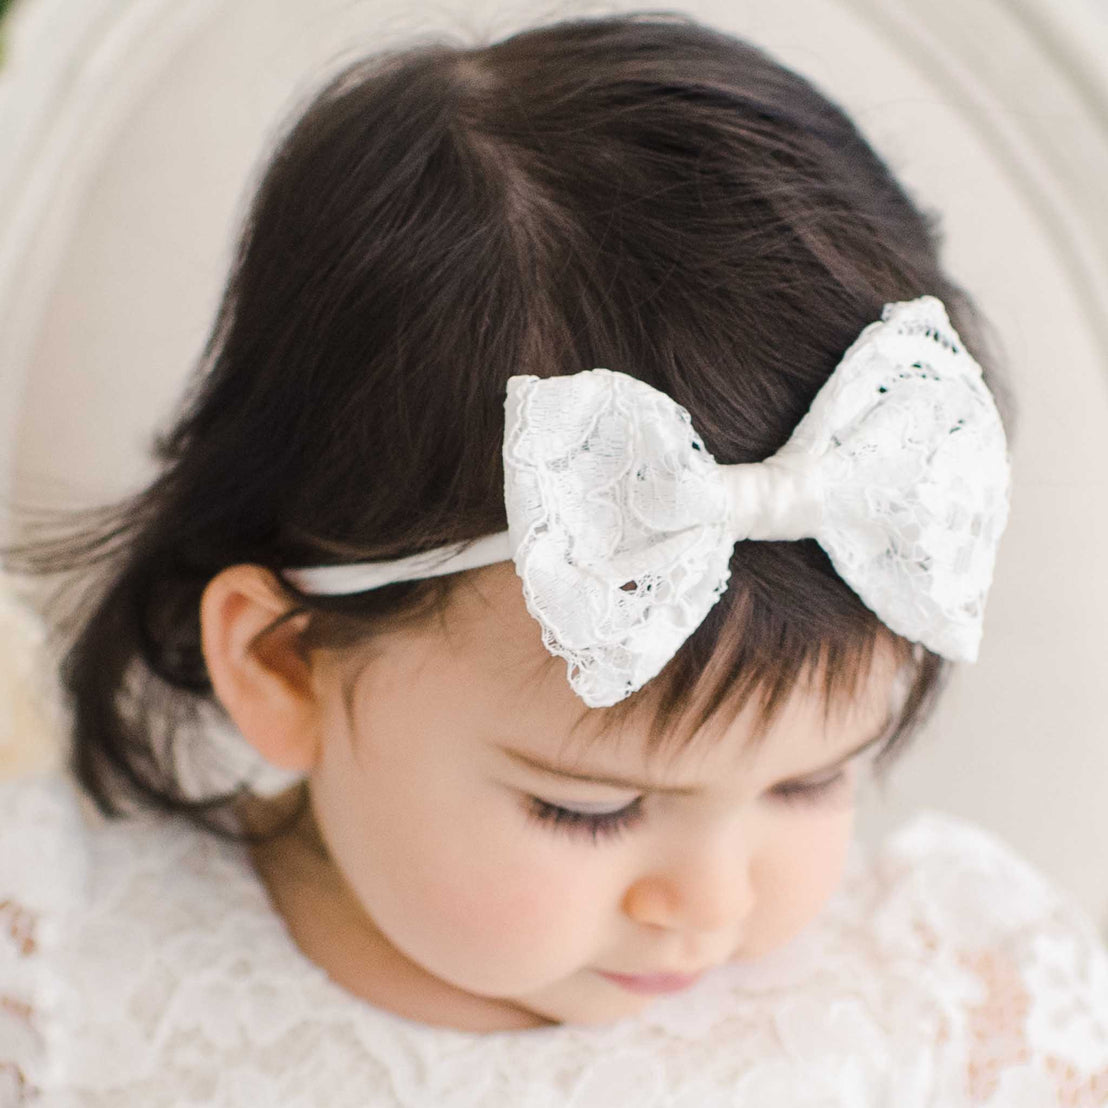 A close-up photo of a baby with dark hair wearing a large, White Rose Bow Headband, looking downward with a soft-focus background. The baby is dressed in a white lace outfit.